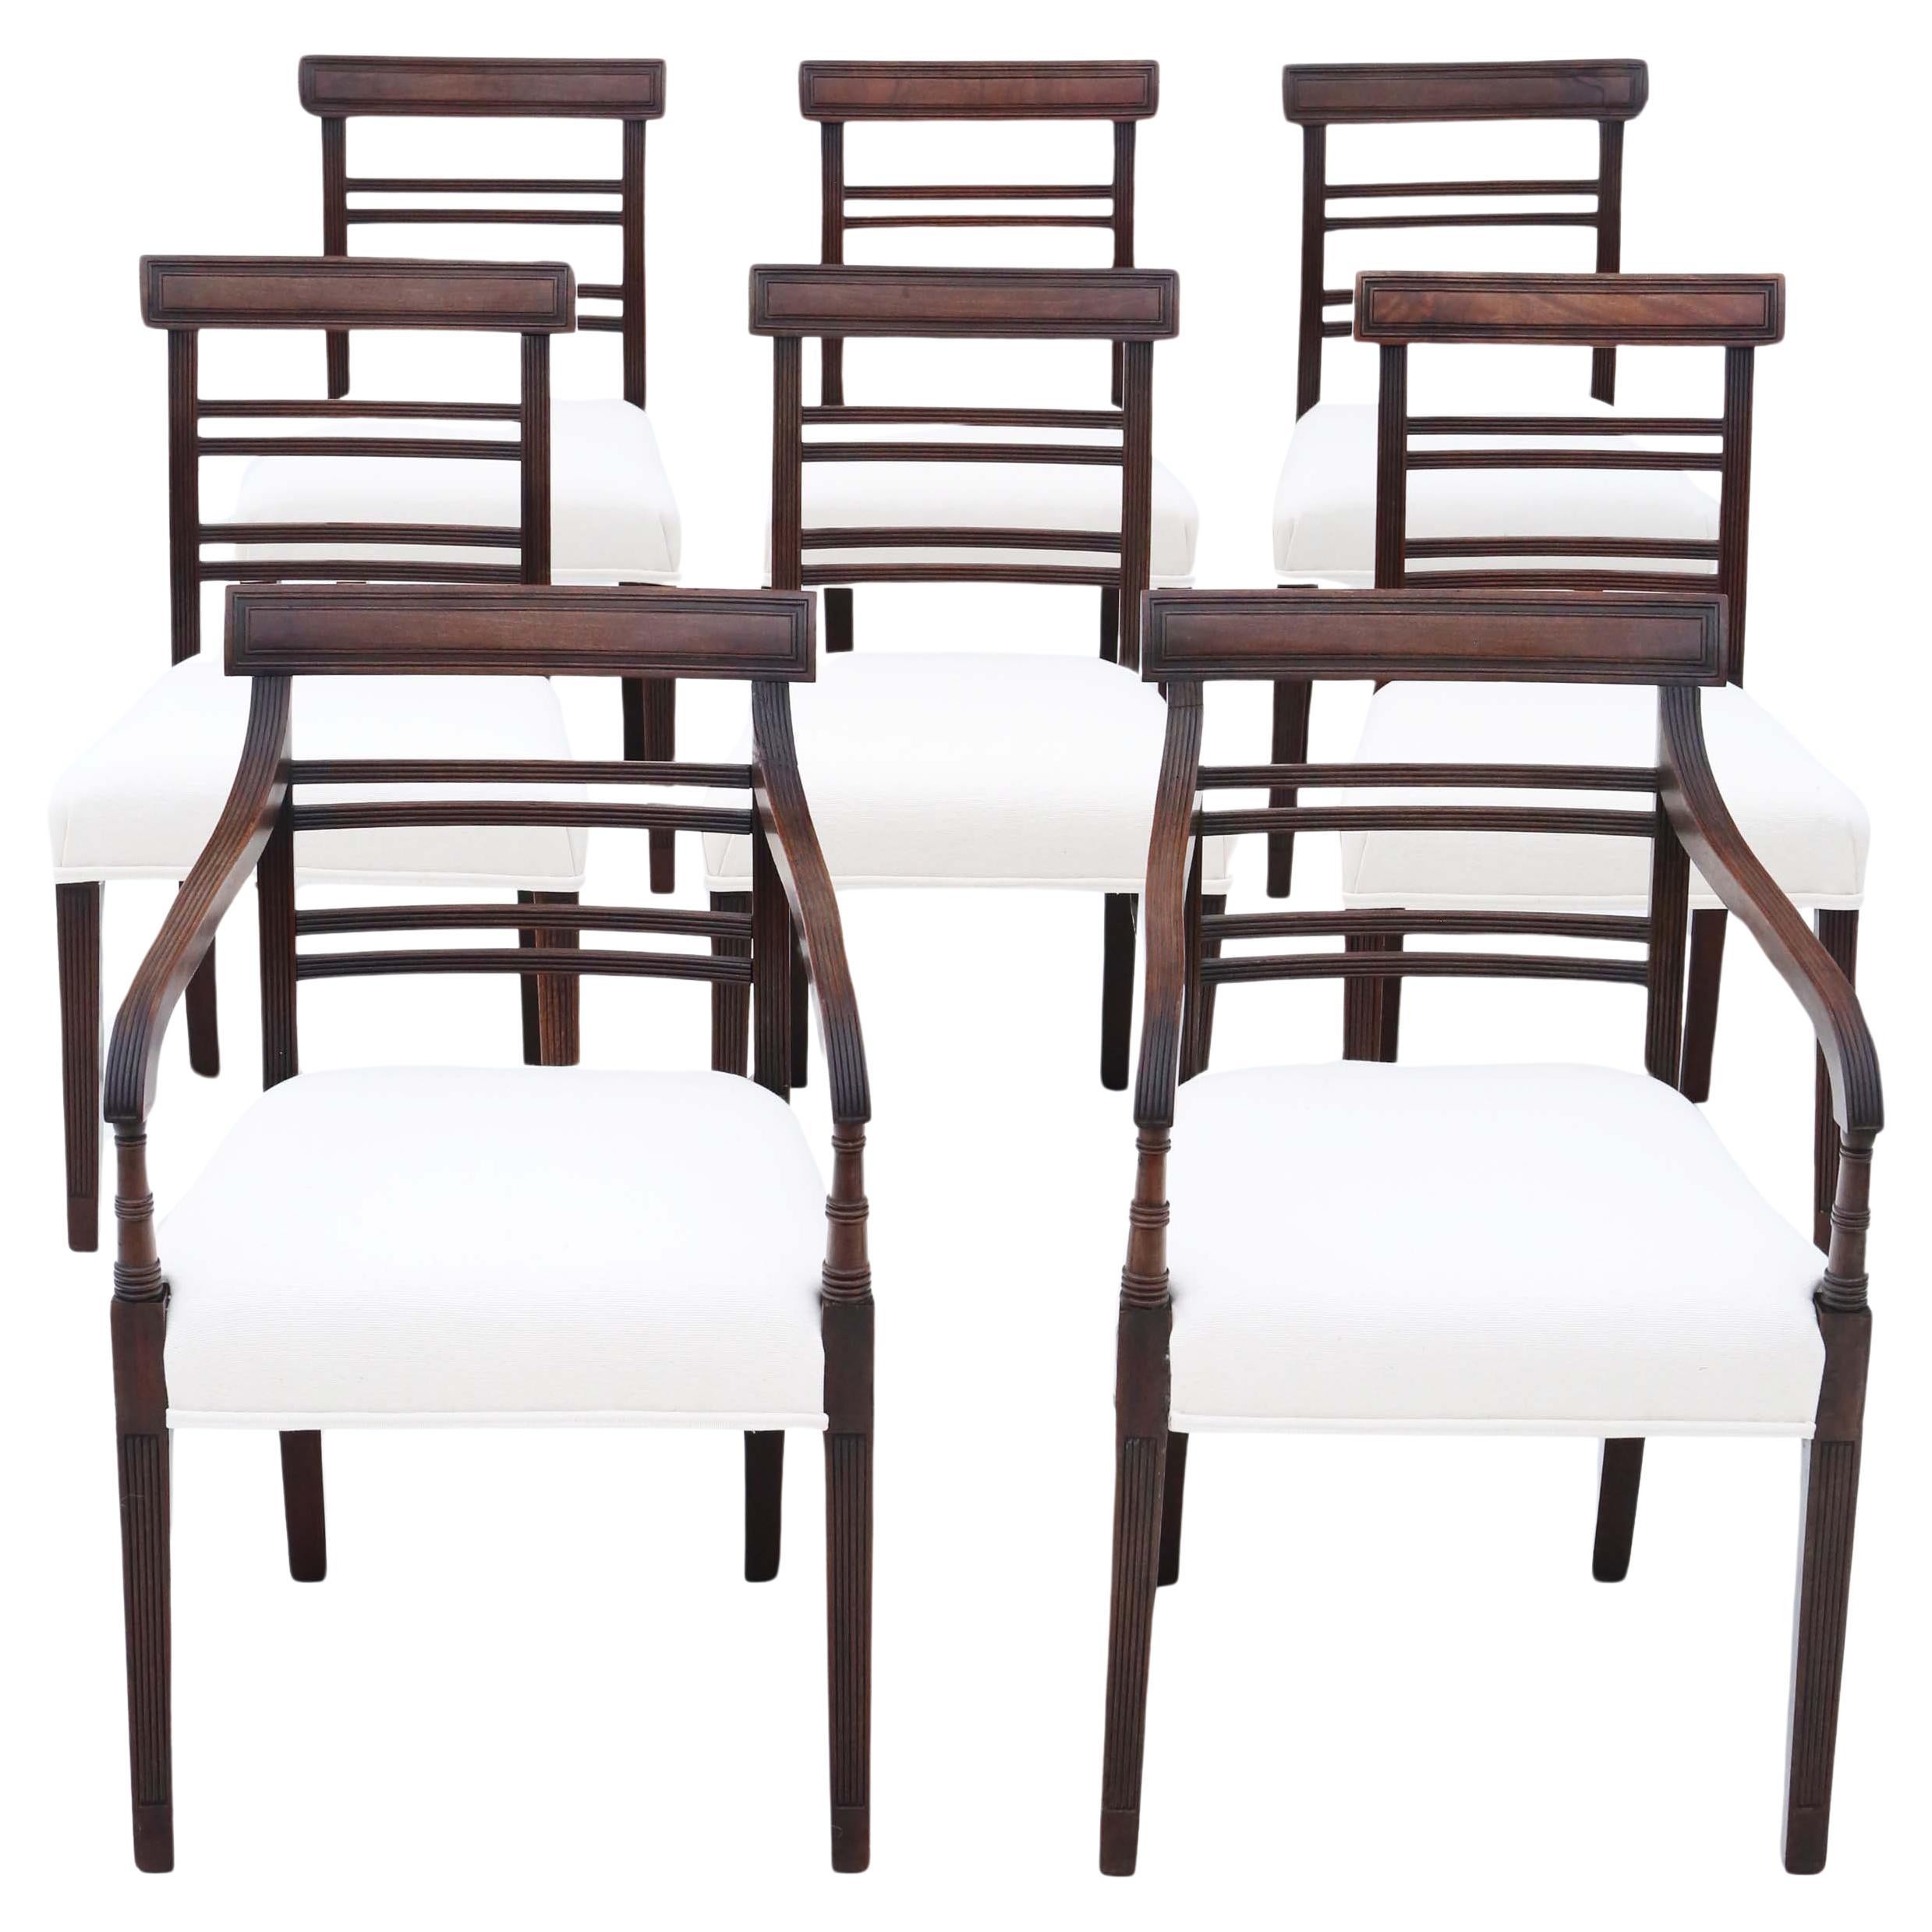 Early 19th Century Mahogany Dining Chairs: Set of 8 (6+2) Antique Quality, C1810